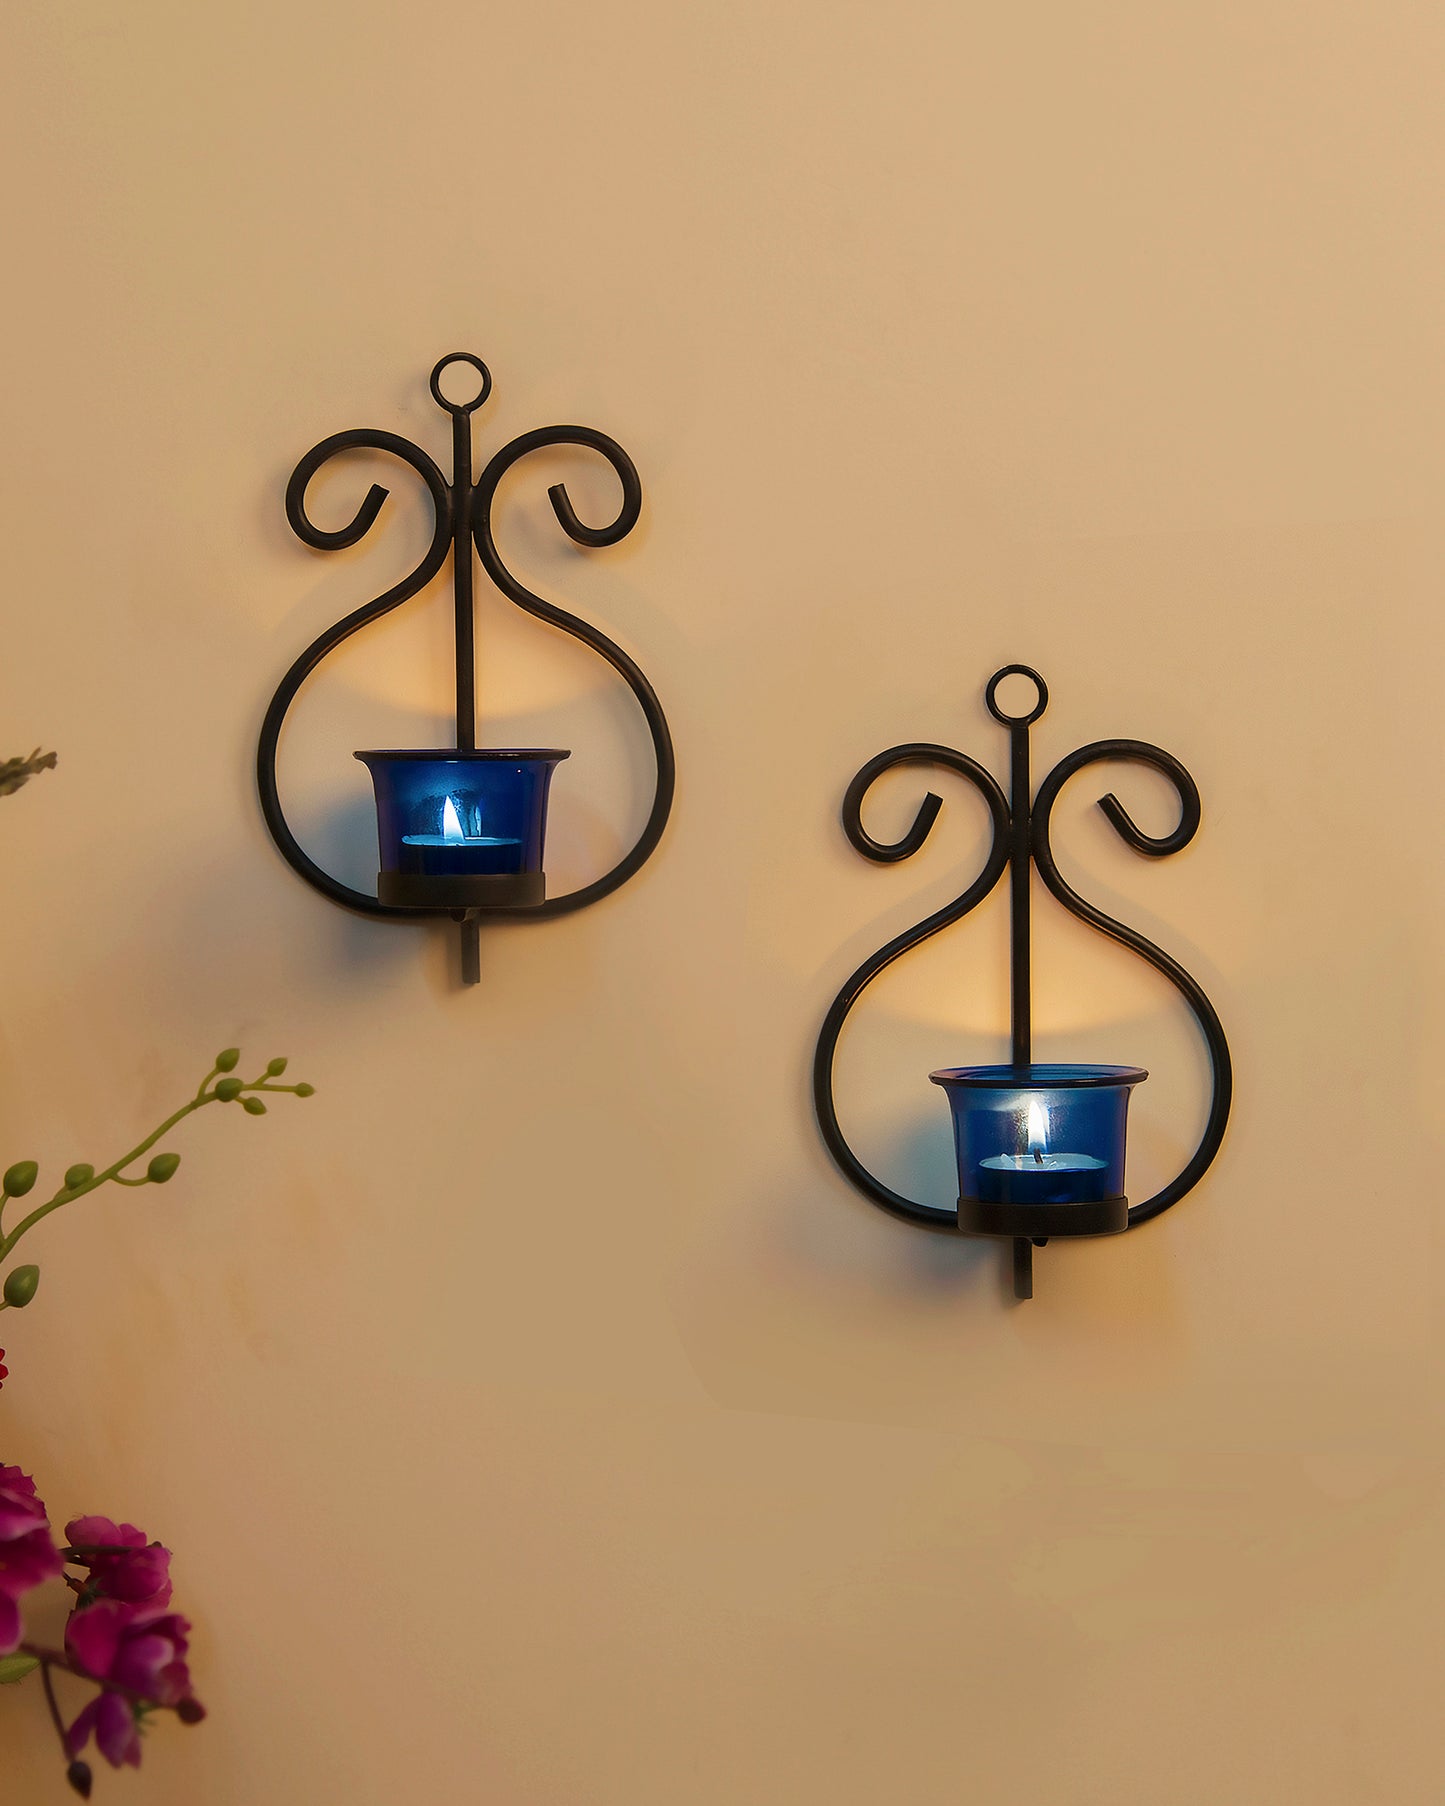 Set of 2 Decorative Wall Sconce/Candle Holder With Glass and Free T-light Candles